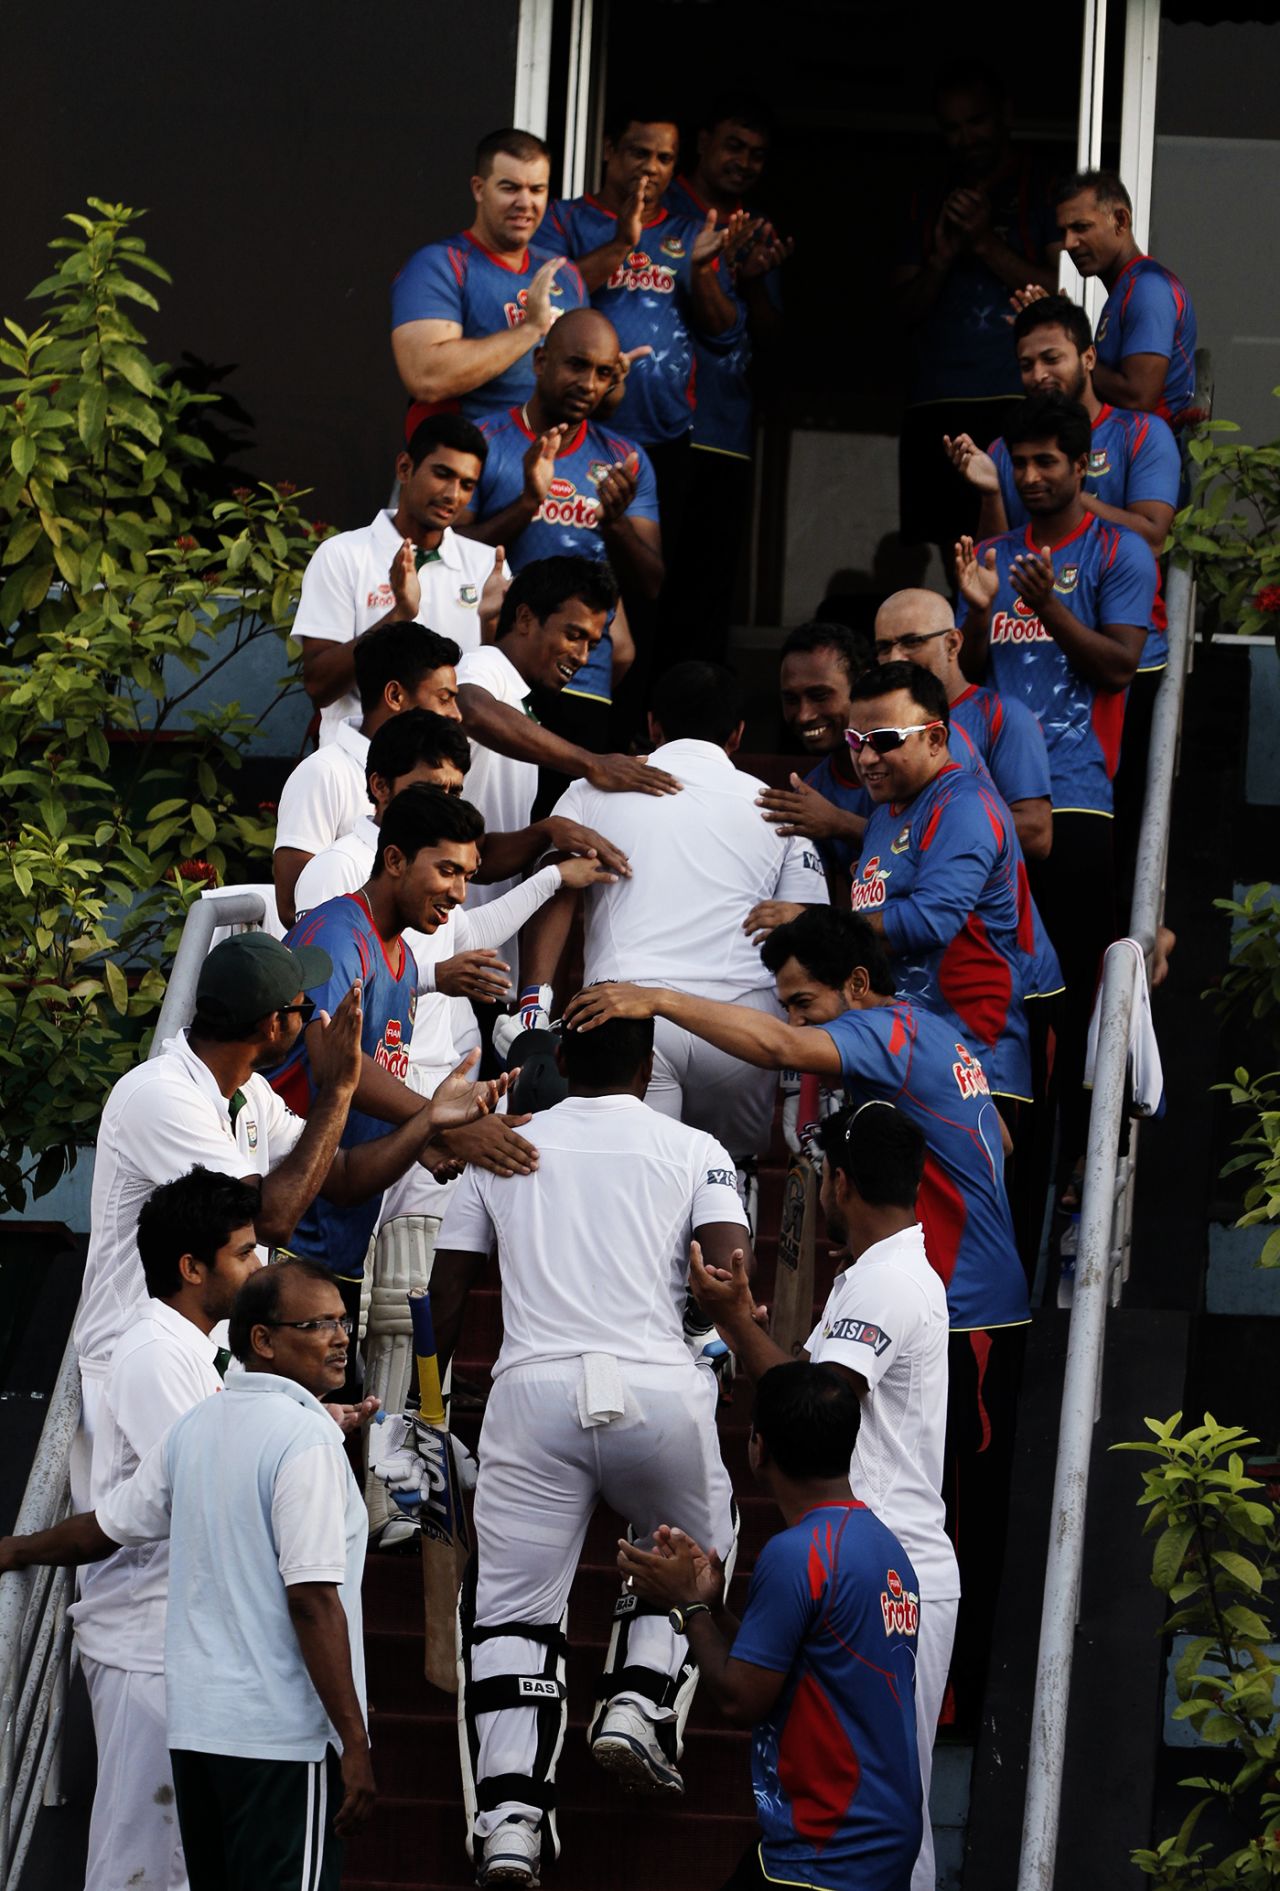 The Bangladesh players welcome back Tamim Iqbal and Imrul Kayes after their record stand, Bangladesh v Pakistan, 1st Test, Khulna, 4th day, May 1, 2015